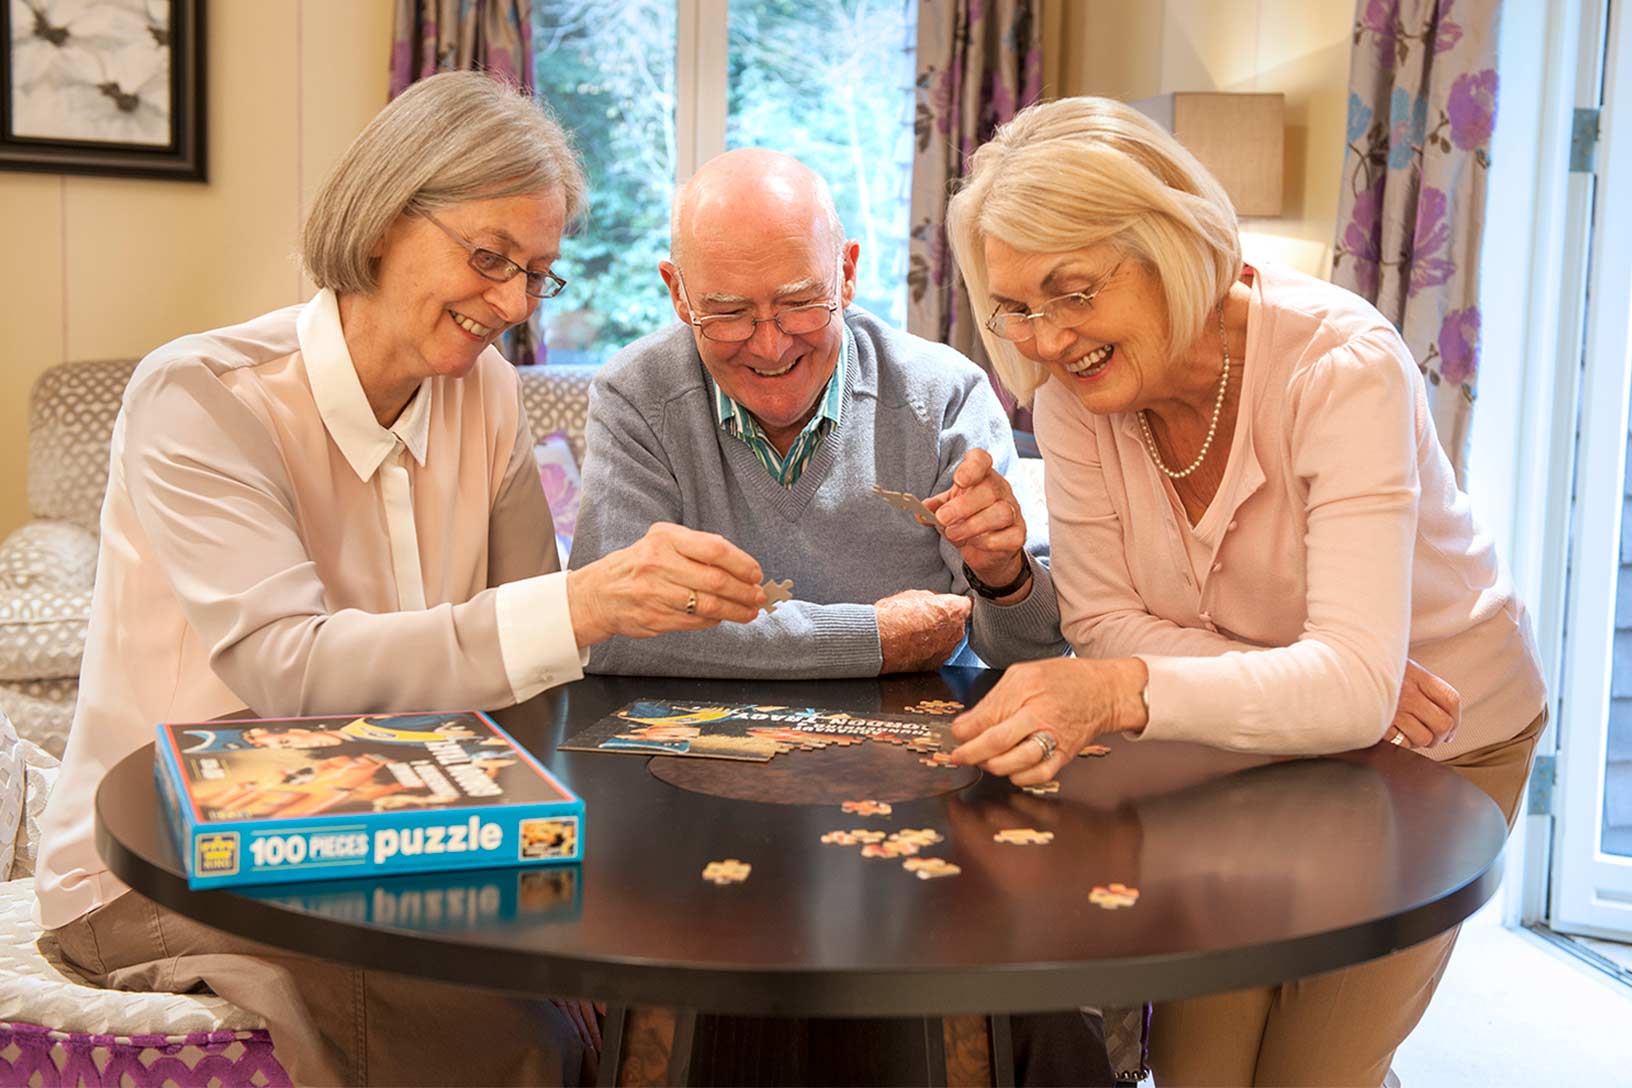 Three residence sitting around a table, focused on a jigsaw puzzle, enjoying the moment together.